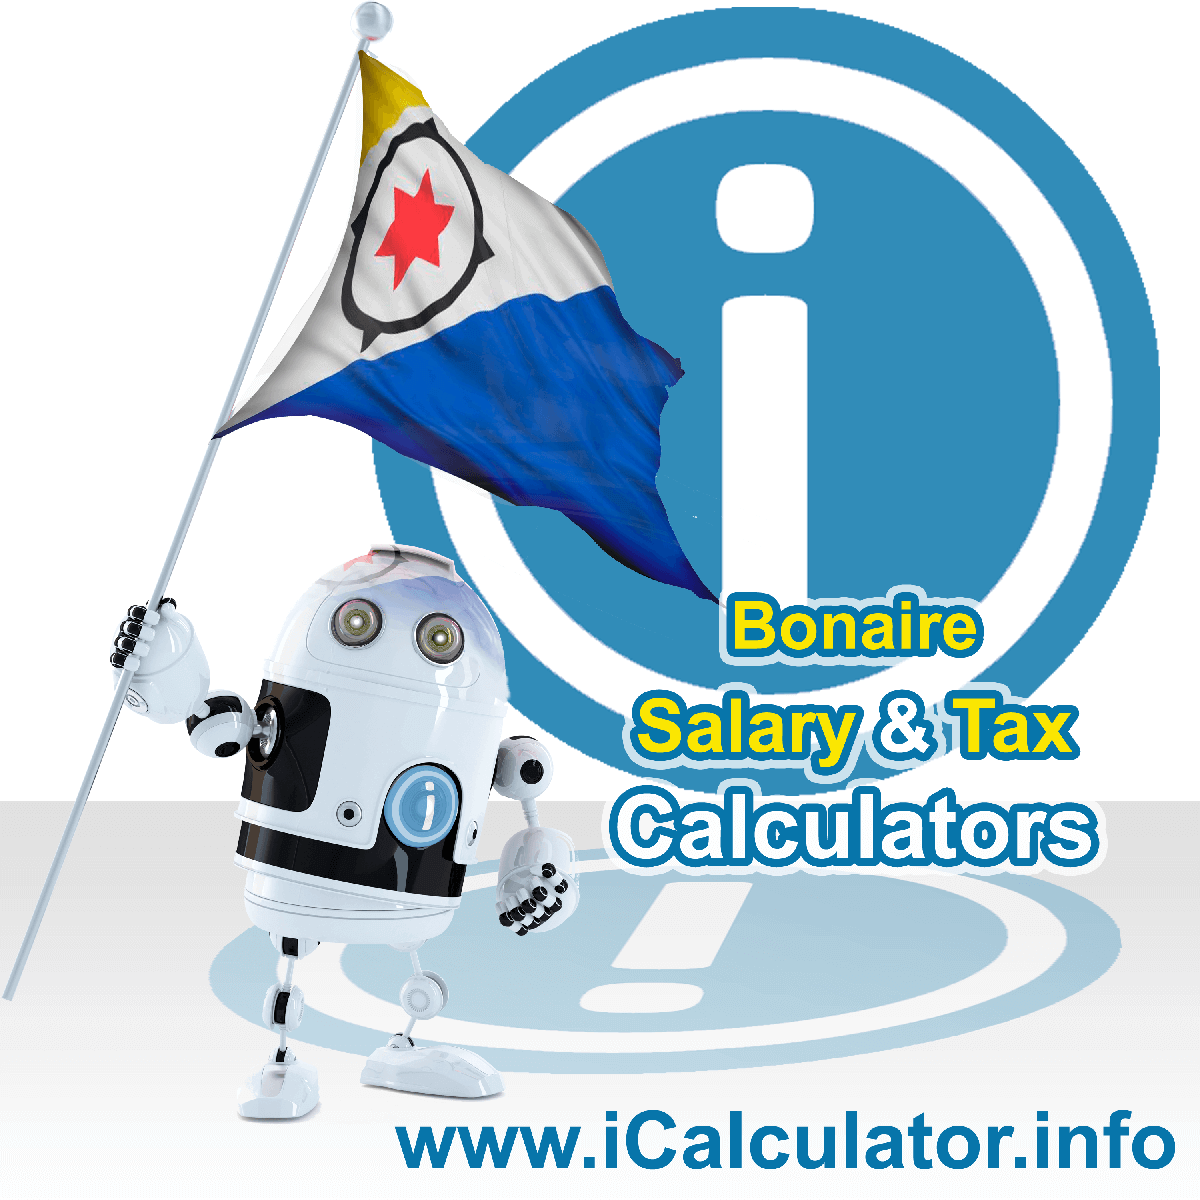 Bonaire Salary Calculator. This image shows the Bonaireese flag and information relating to the tax formula for the Bonaire Tax Calculator